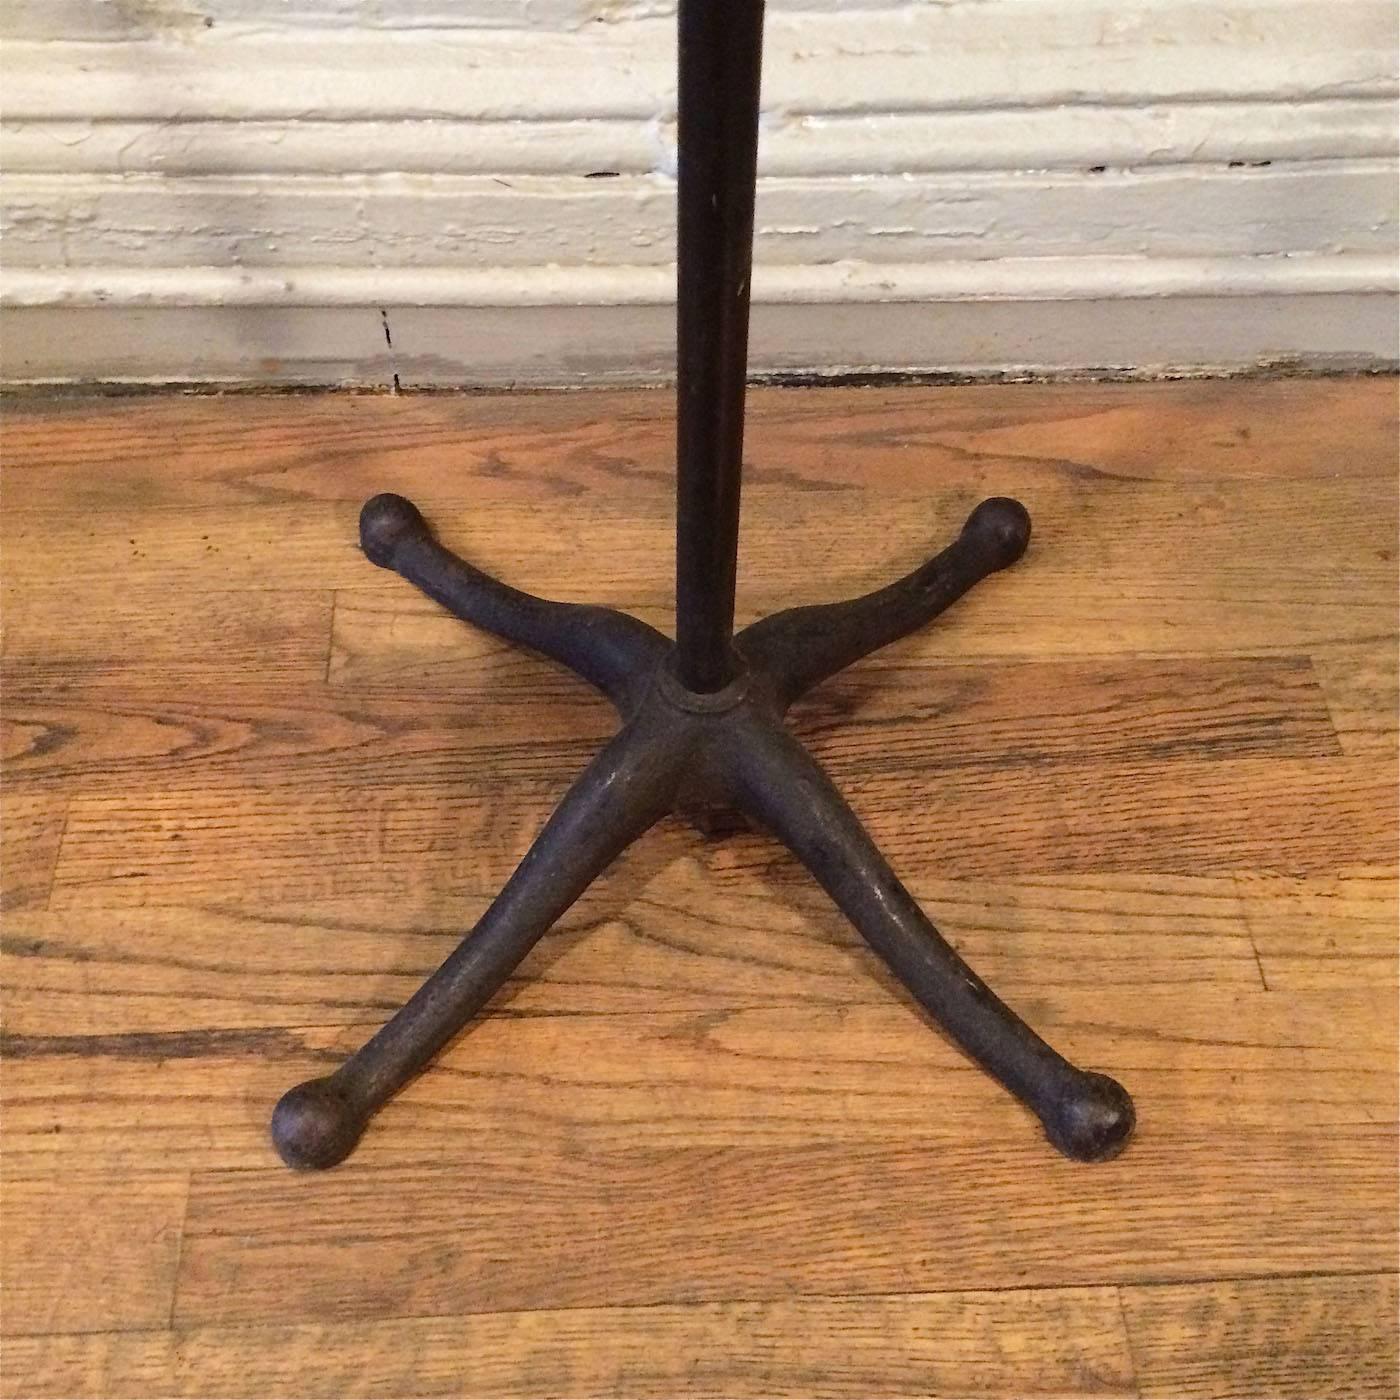 Rare Early 20th Century Industrial Japanned Steel Lingerie Rounder Rack 2